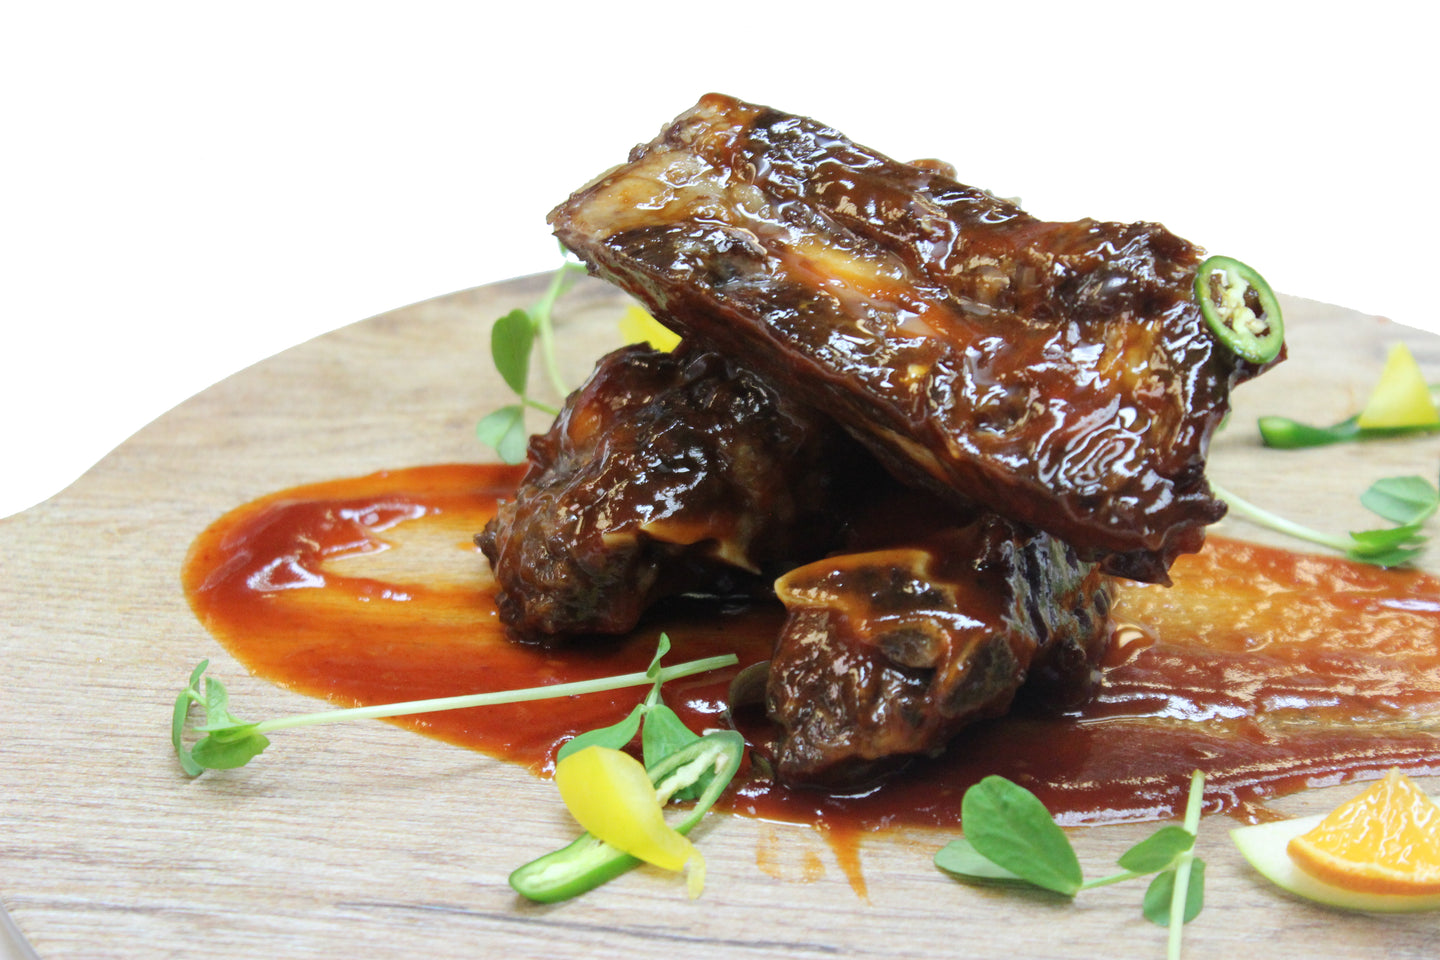 BBQ Dinosaur Ribs made by Ely's Fine Foods